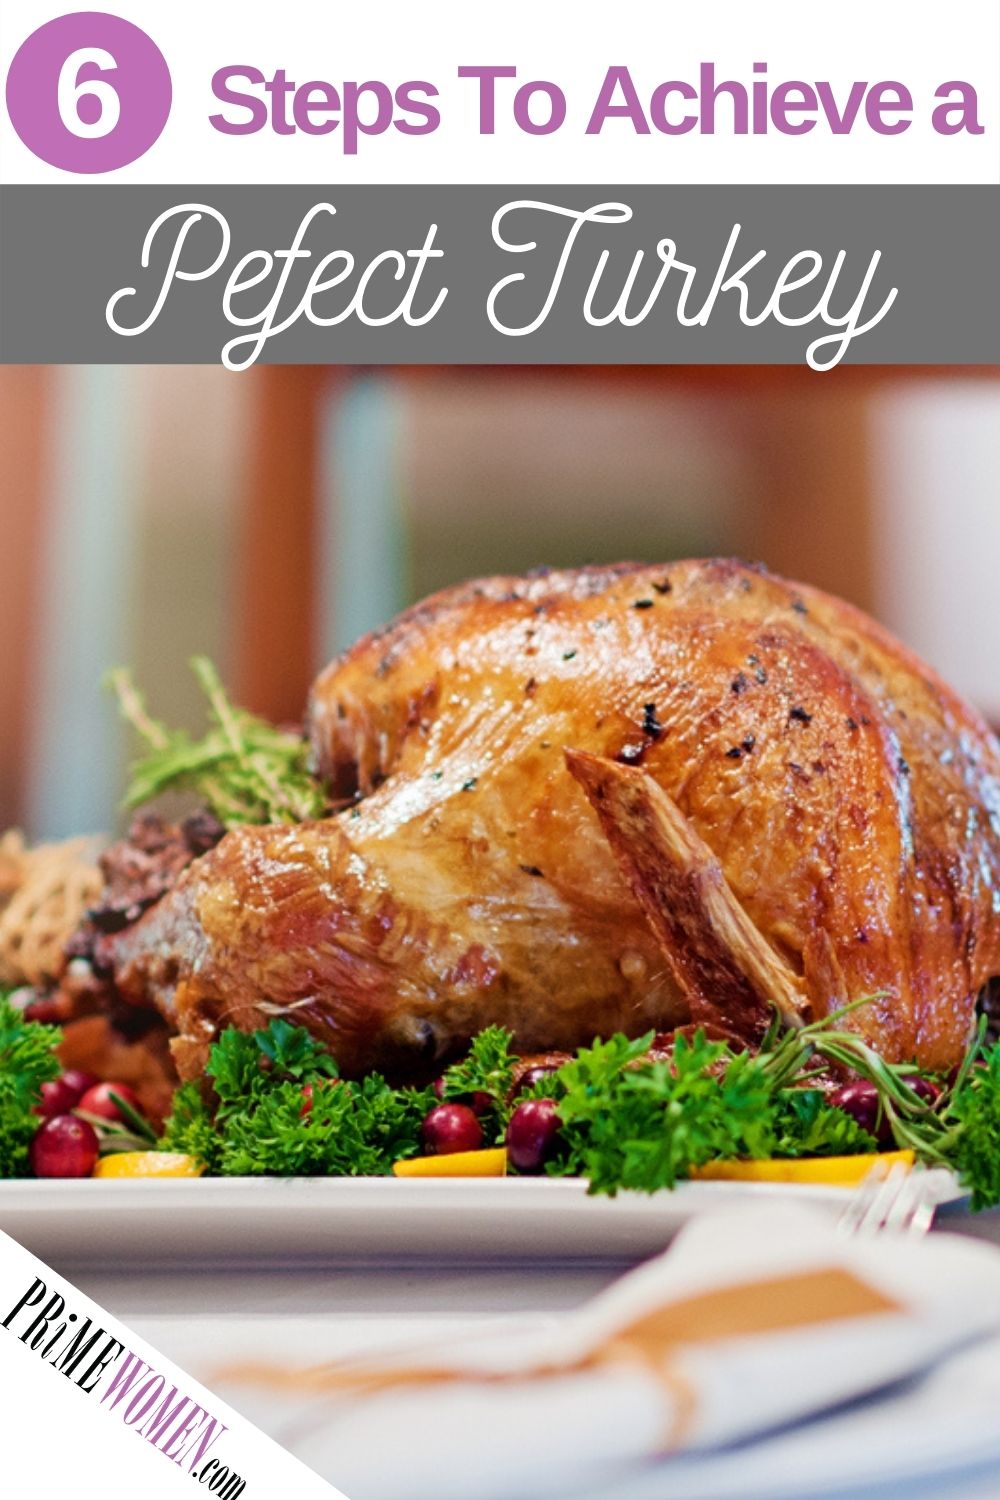 6 Steps for achieving the perfect turkey.